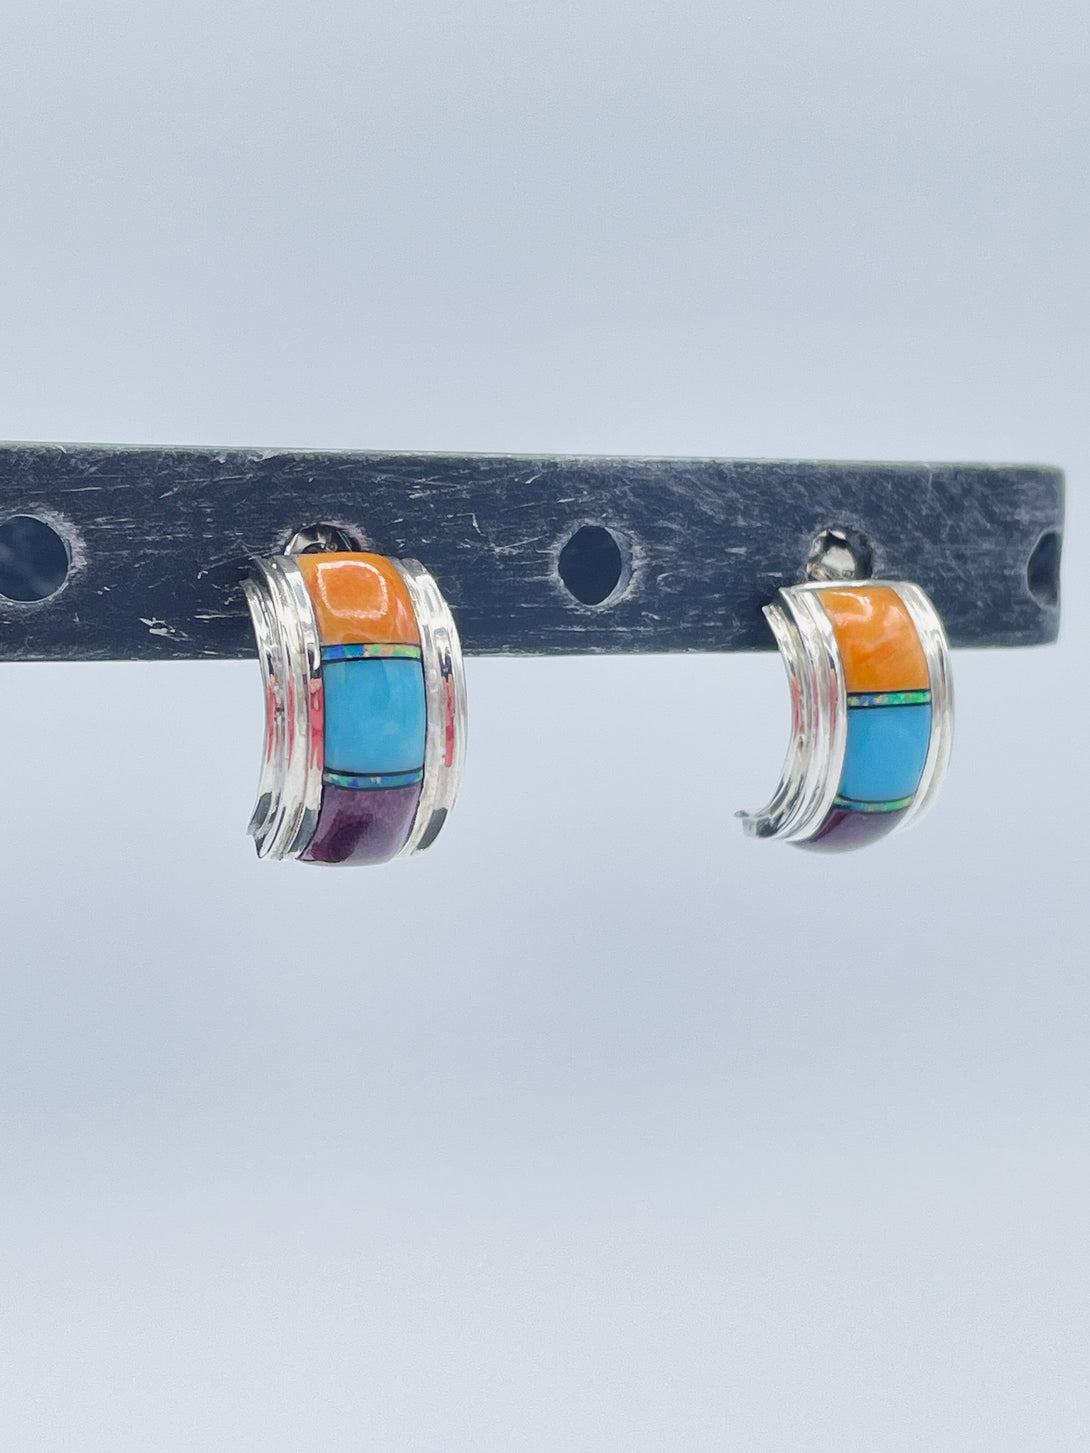 Women's Multicolored Turquoise and Sterling Silver Earrings